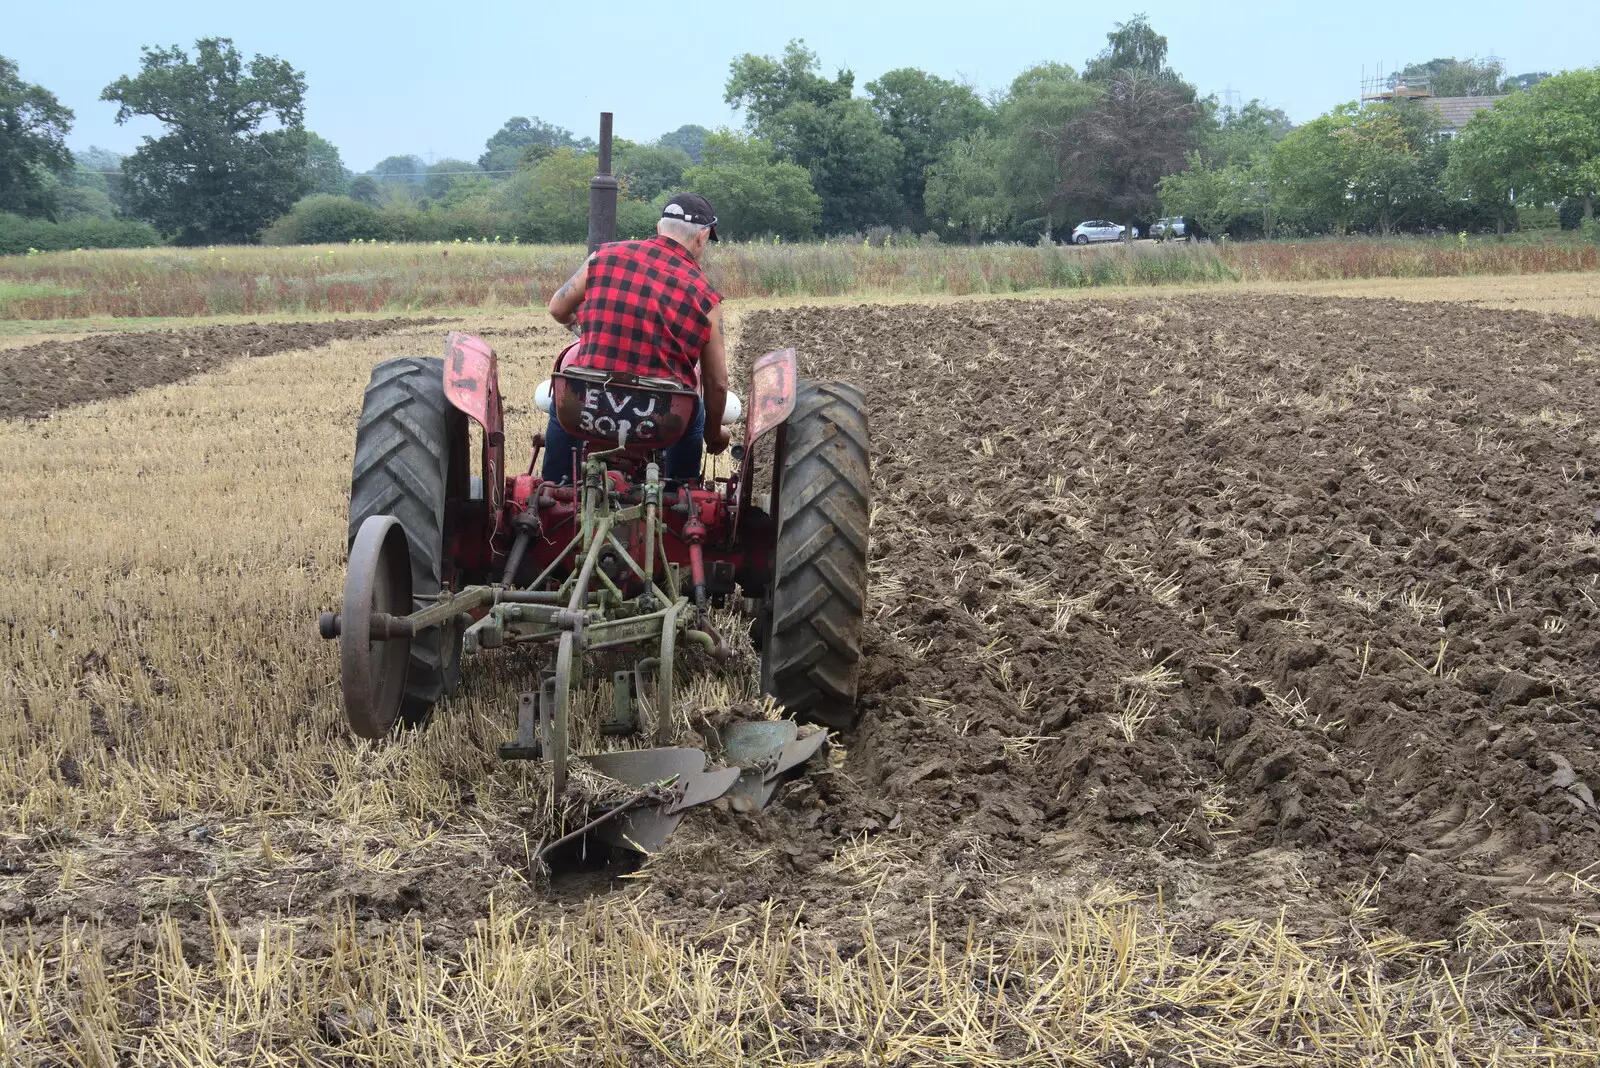 Another run up the field, from Vintage Tractor Ploughing, Thrandeston, Suffolk - 26th September 2021